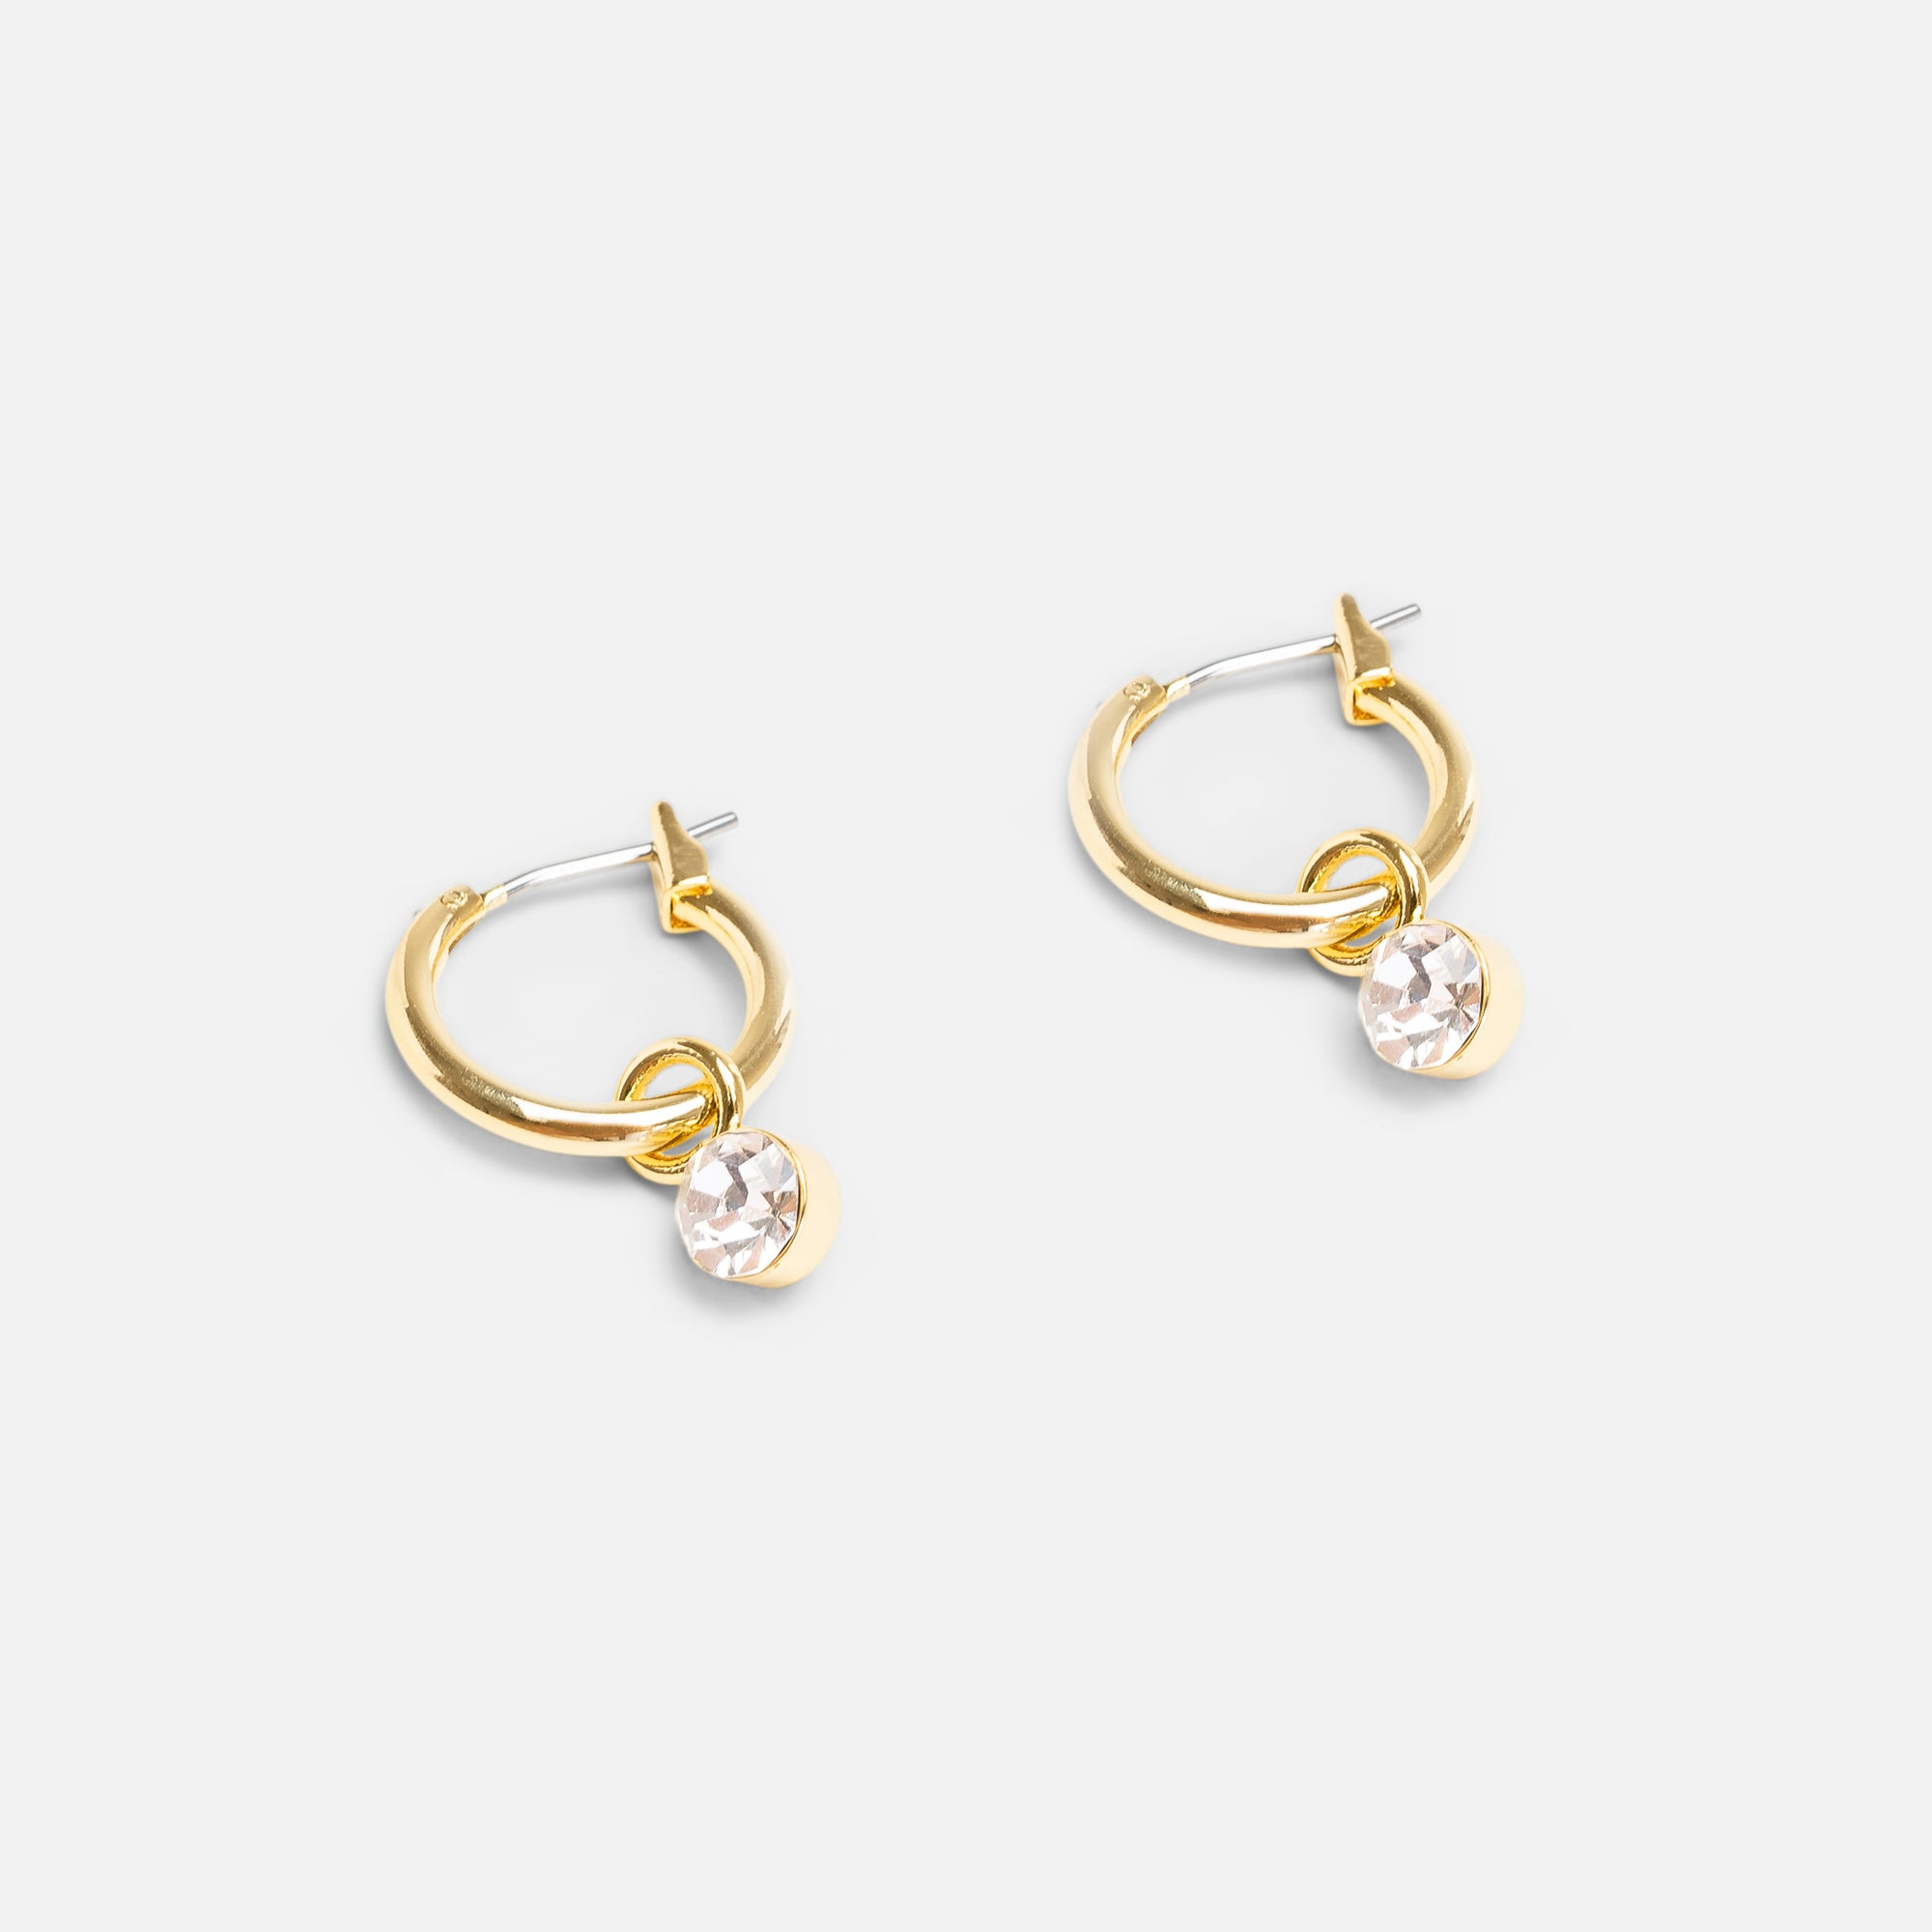 Golden hoop earrings with small silver charm 